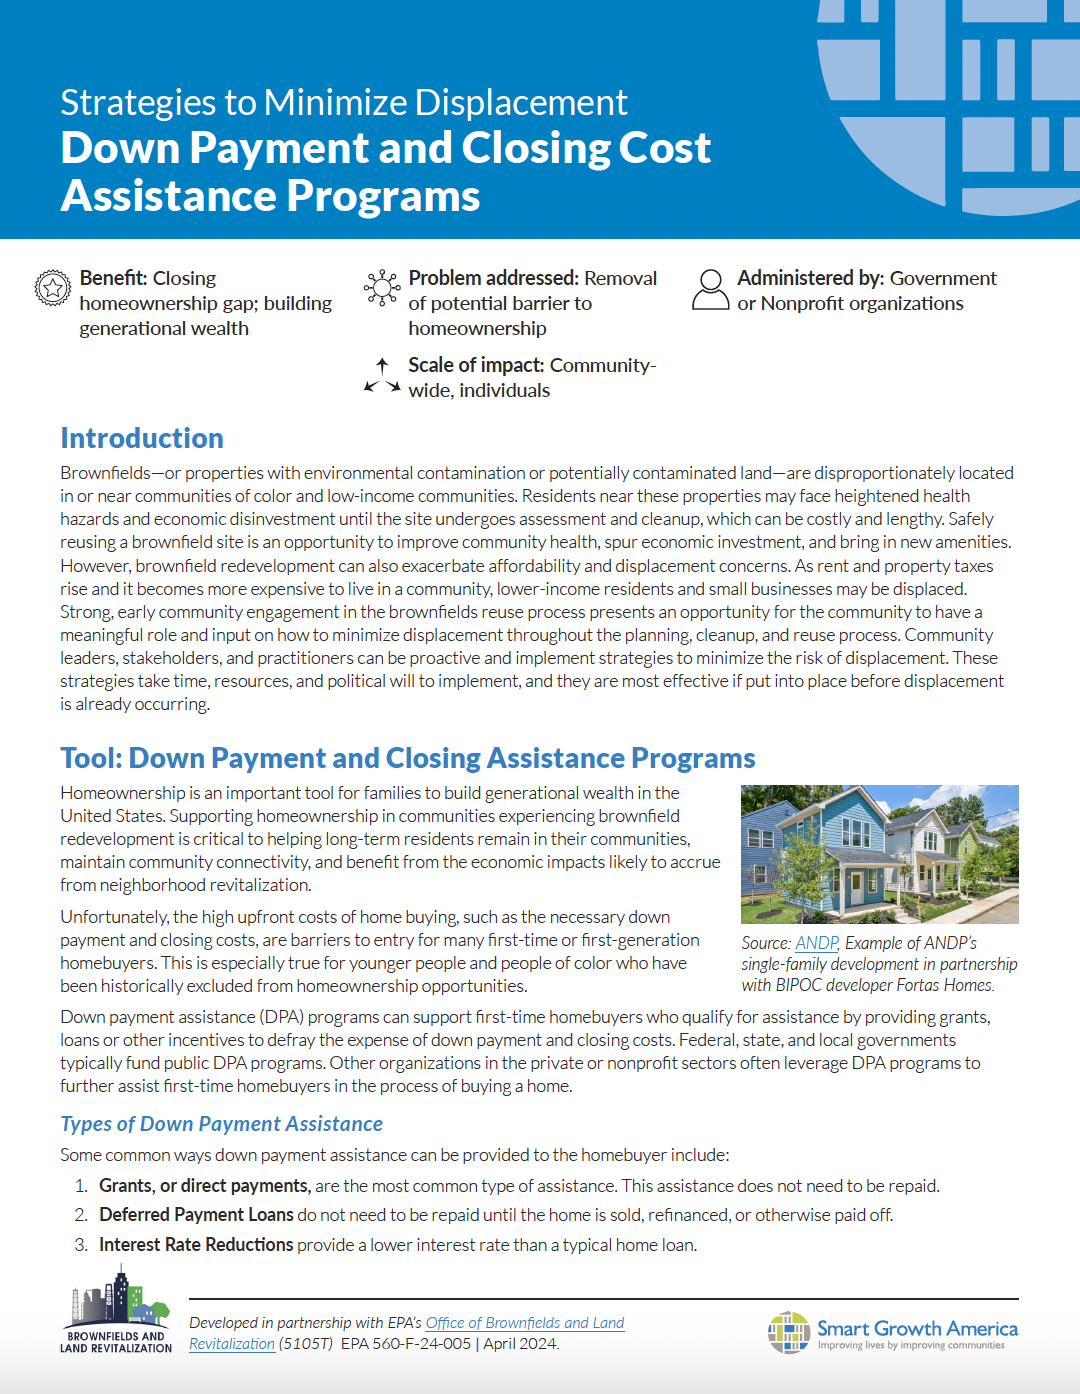 Strategies to Minimize Displacement: Down Payment and Closing Cost Assistance Programs